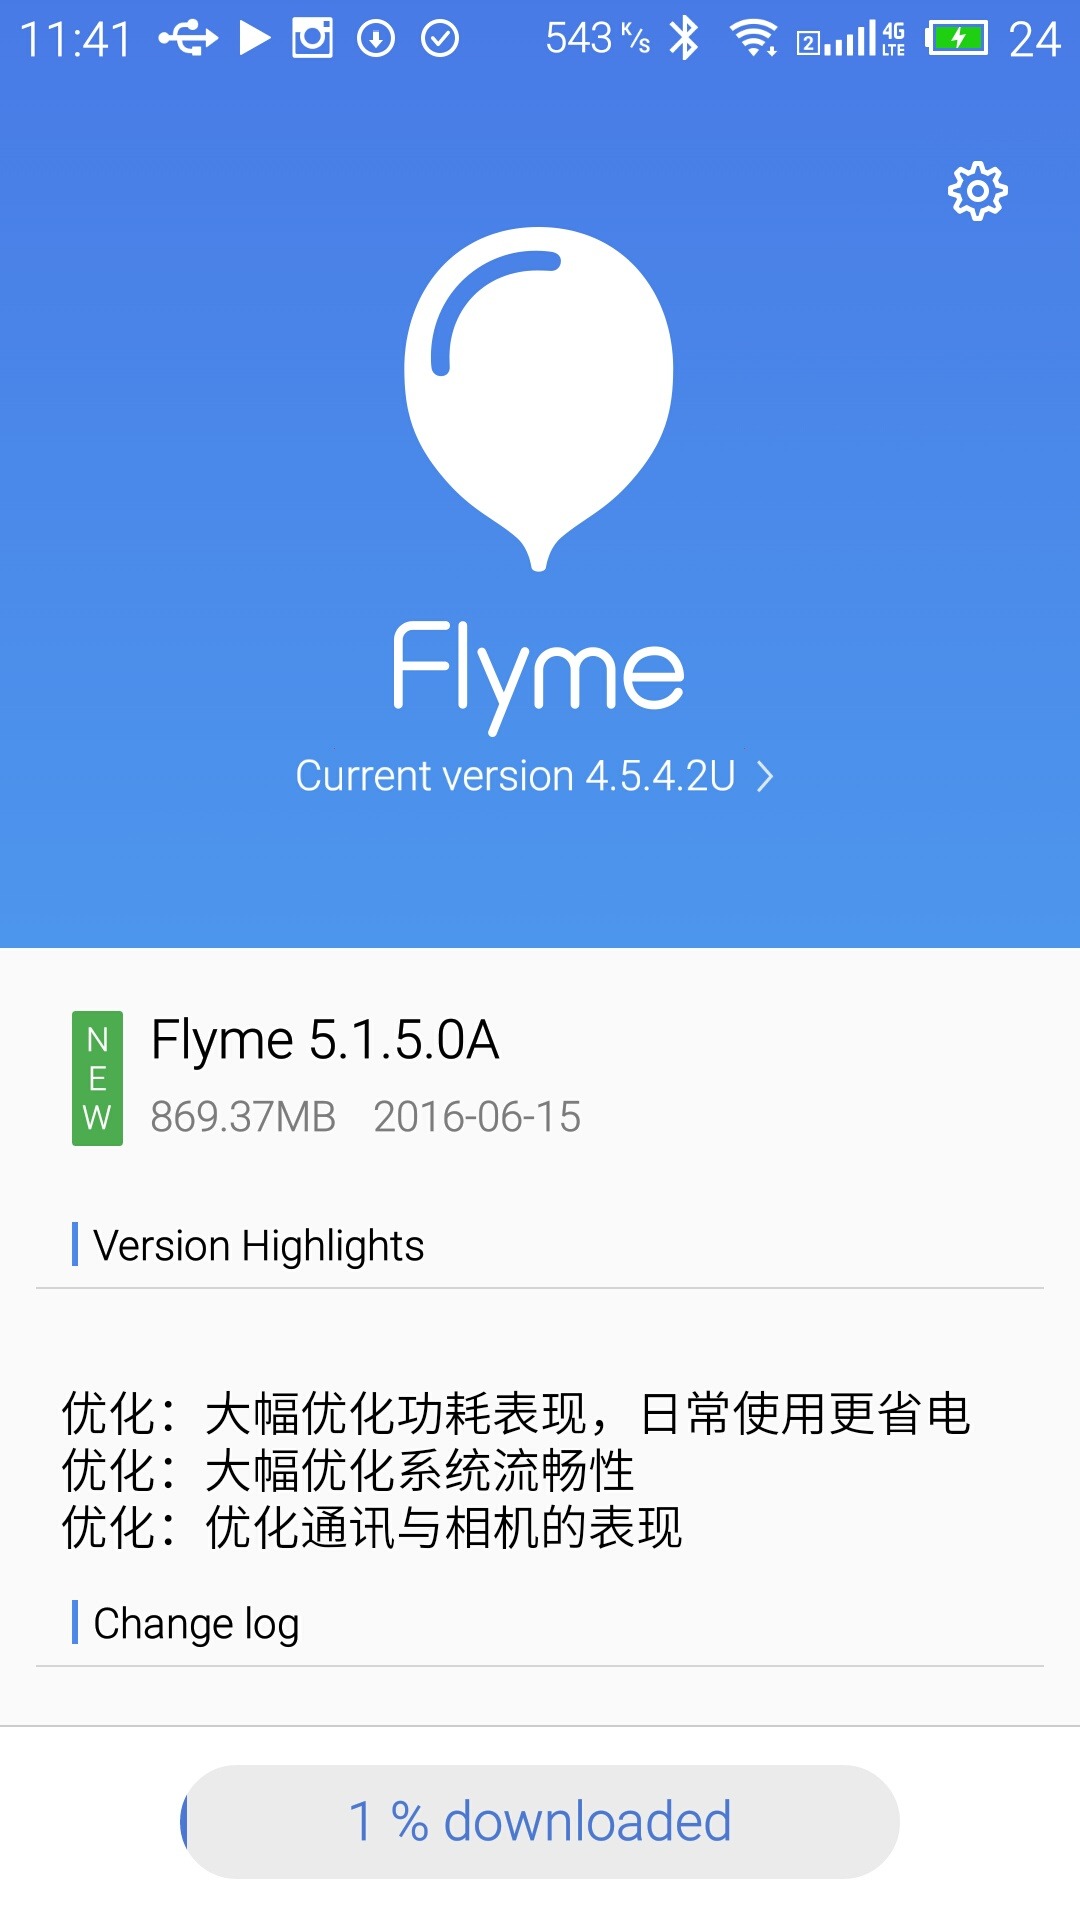 Flyme to the moon